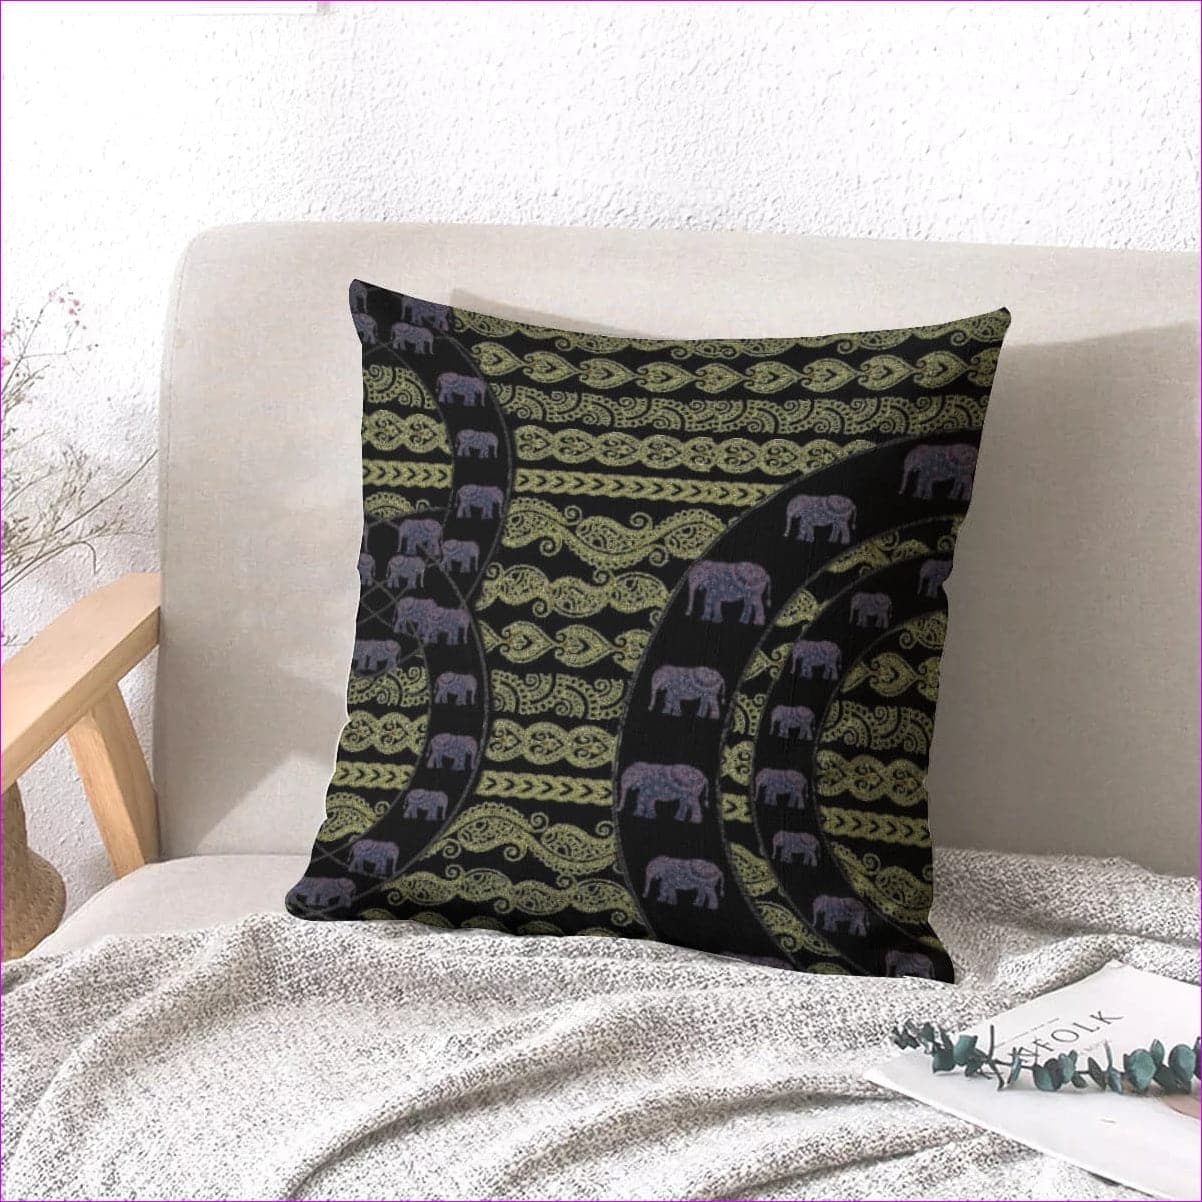 Elegant Elephant Couch pillow with pillow Inserts | linen type fabric - couch pillow at TFC&H Co.